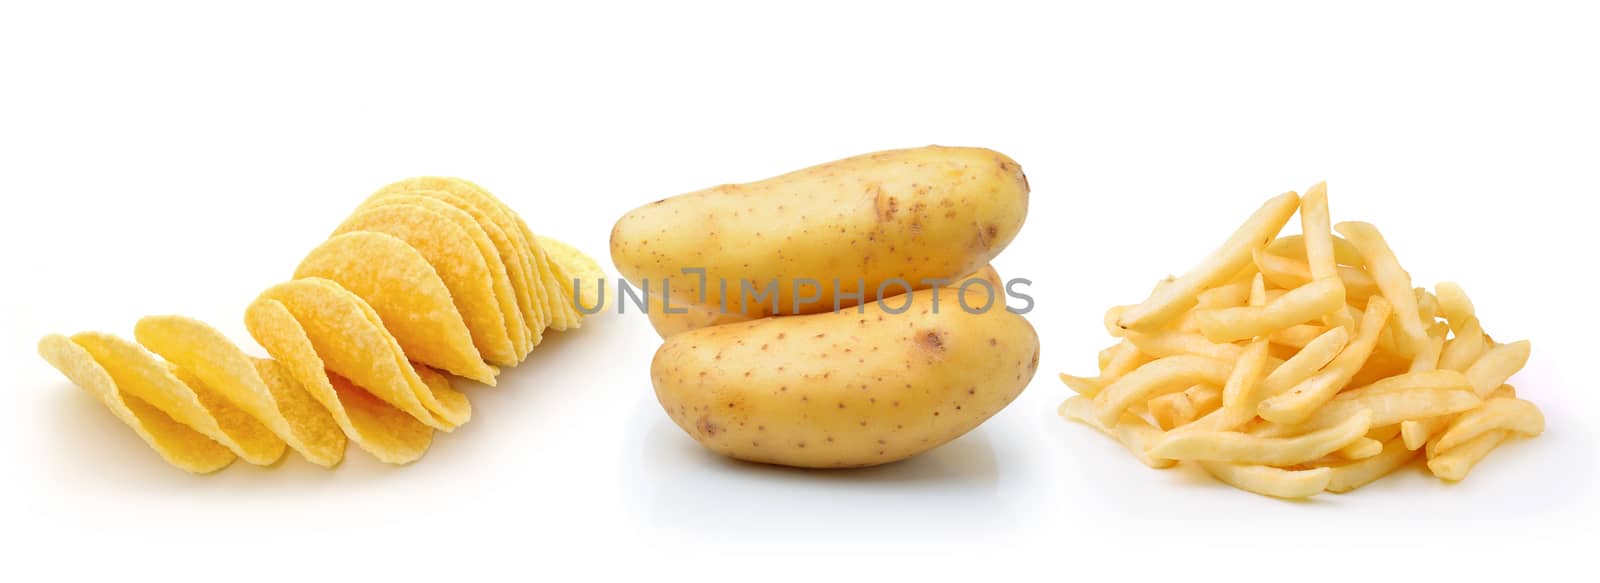 Potato chips, french fries and potato isolated on white backgrou by sommai